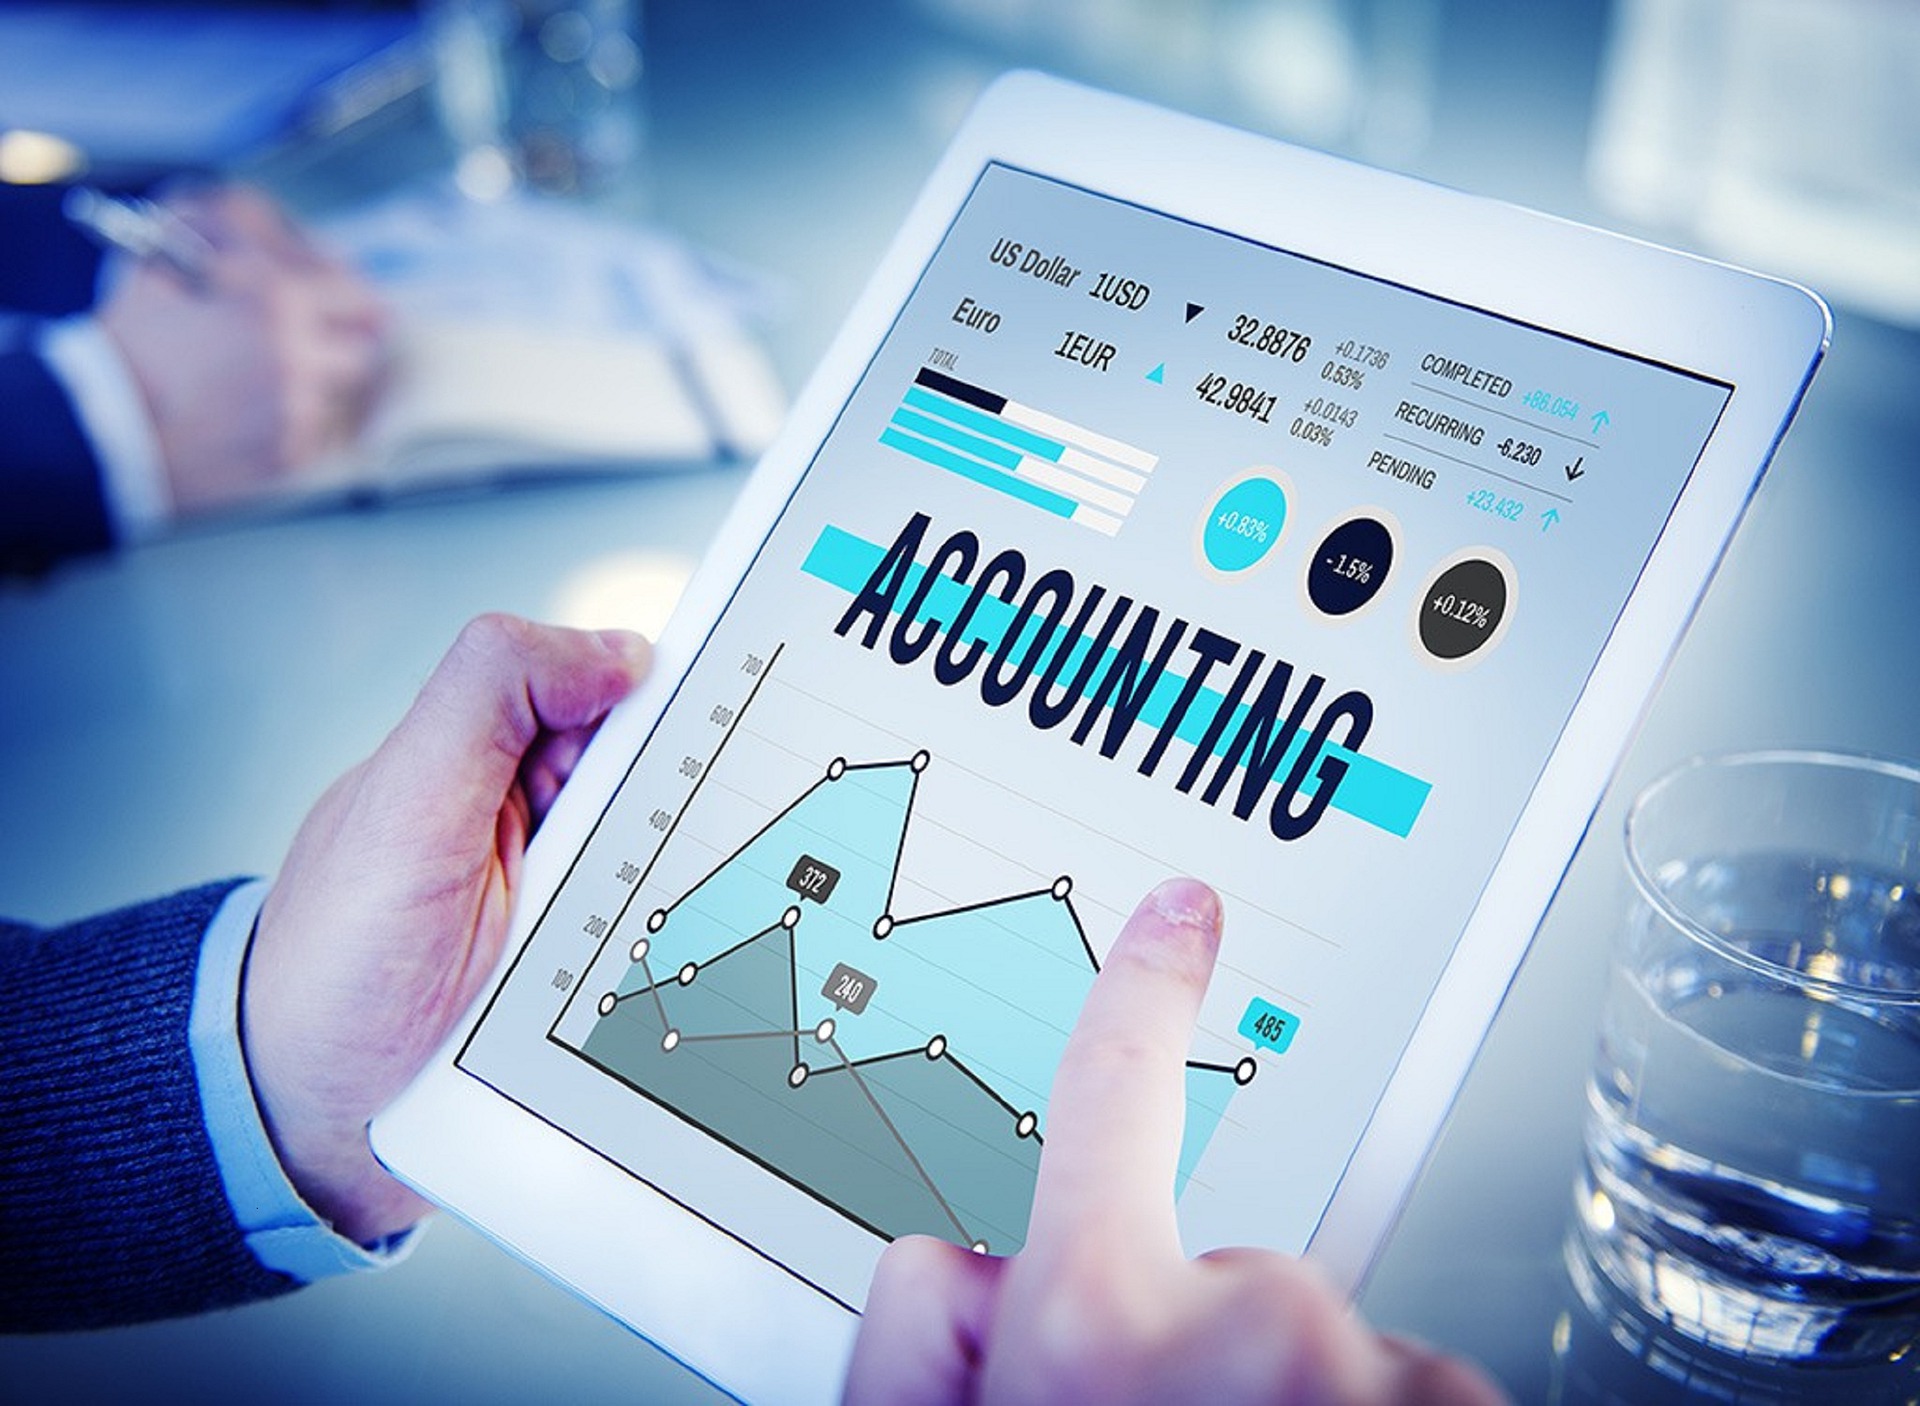 Accounting Software Market Projected to Witness Vigorous Expansion by 2030